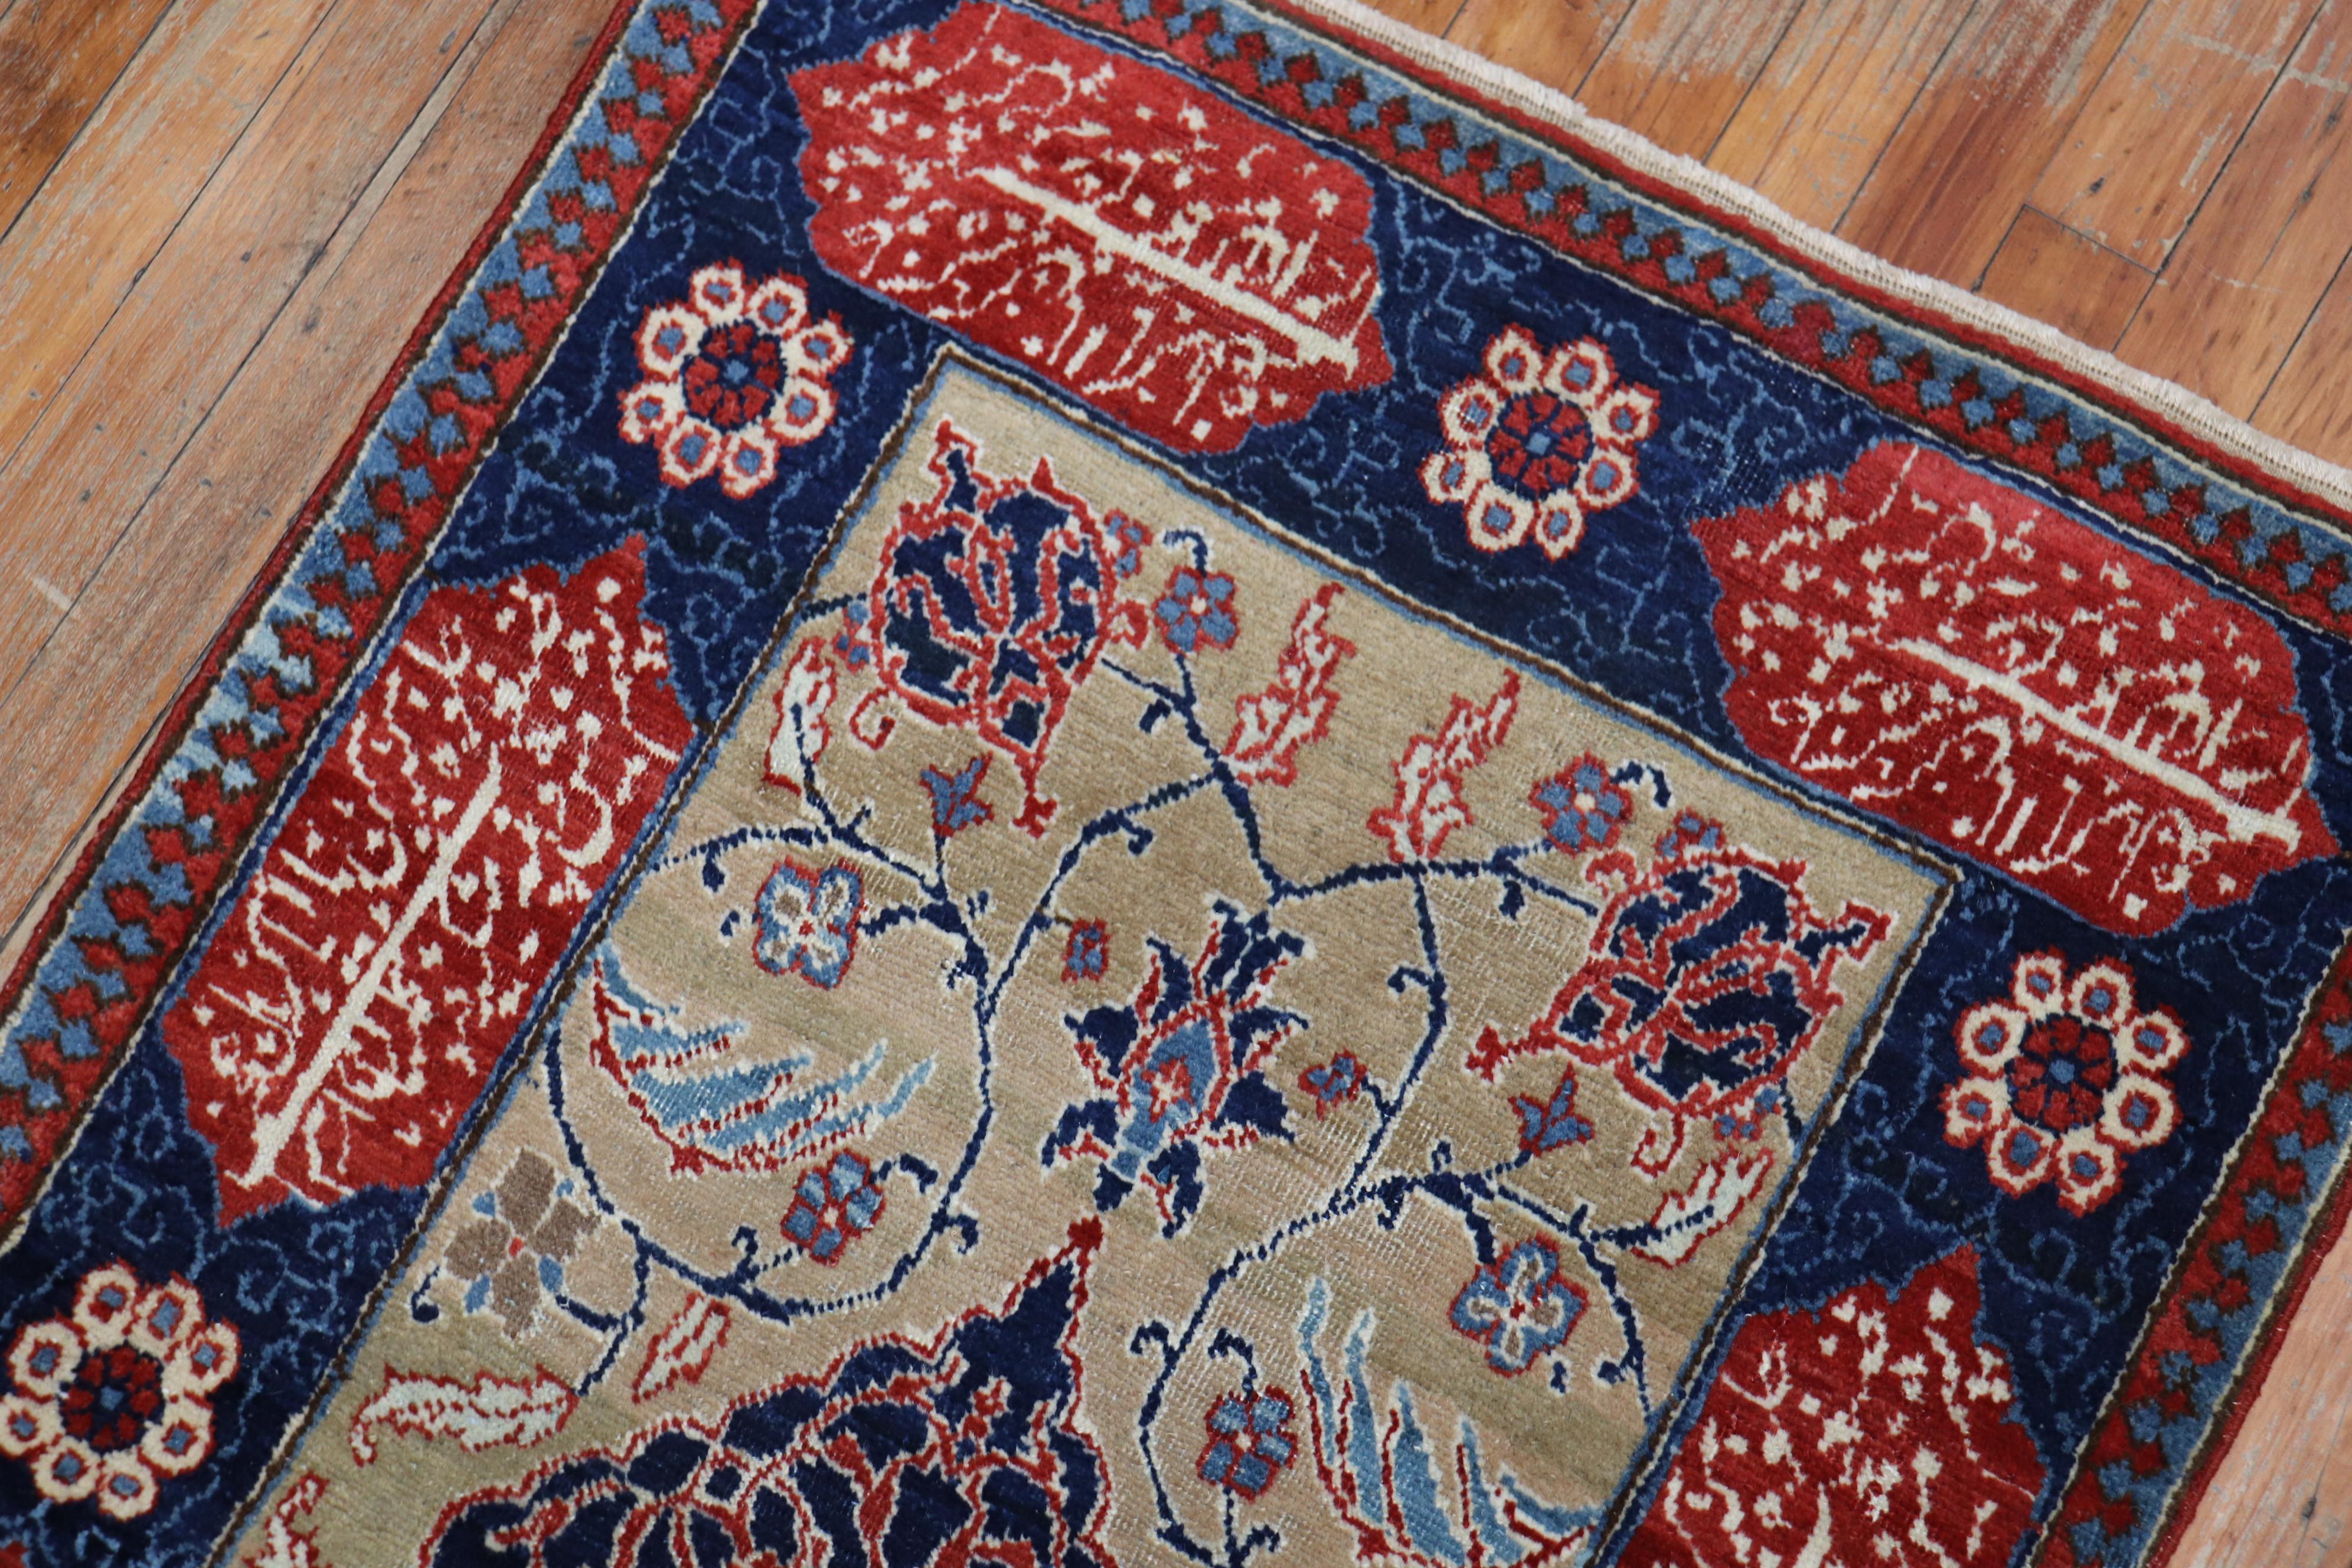 Fine Love Poem Pair of Persian Tabriz Mat Rugs For Sale 1